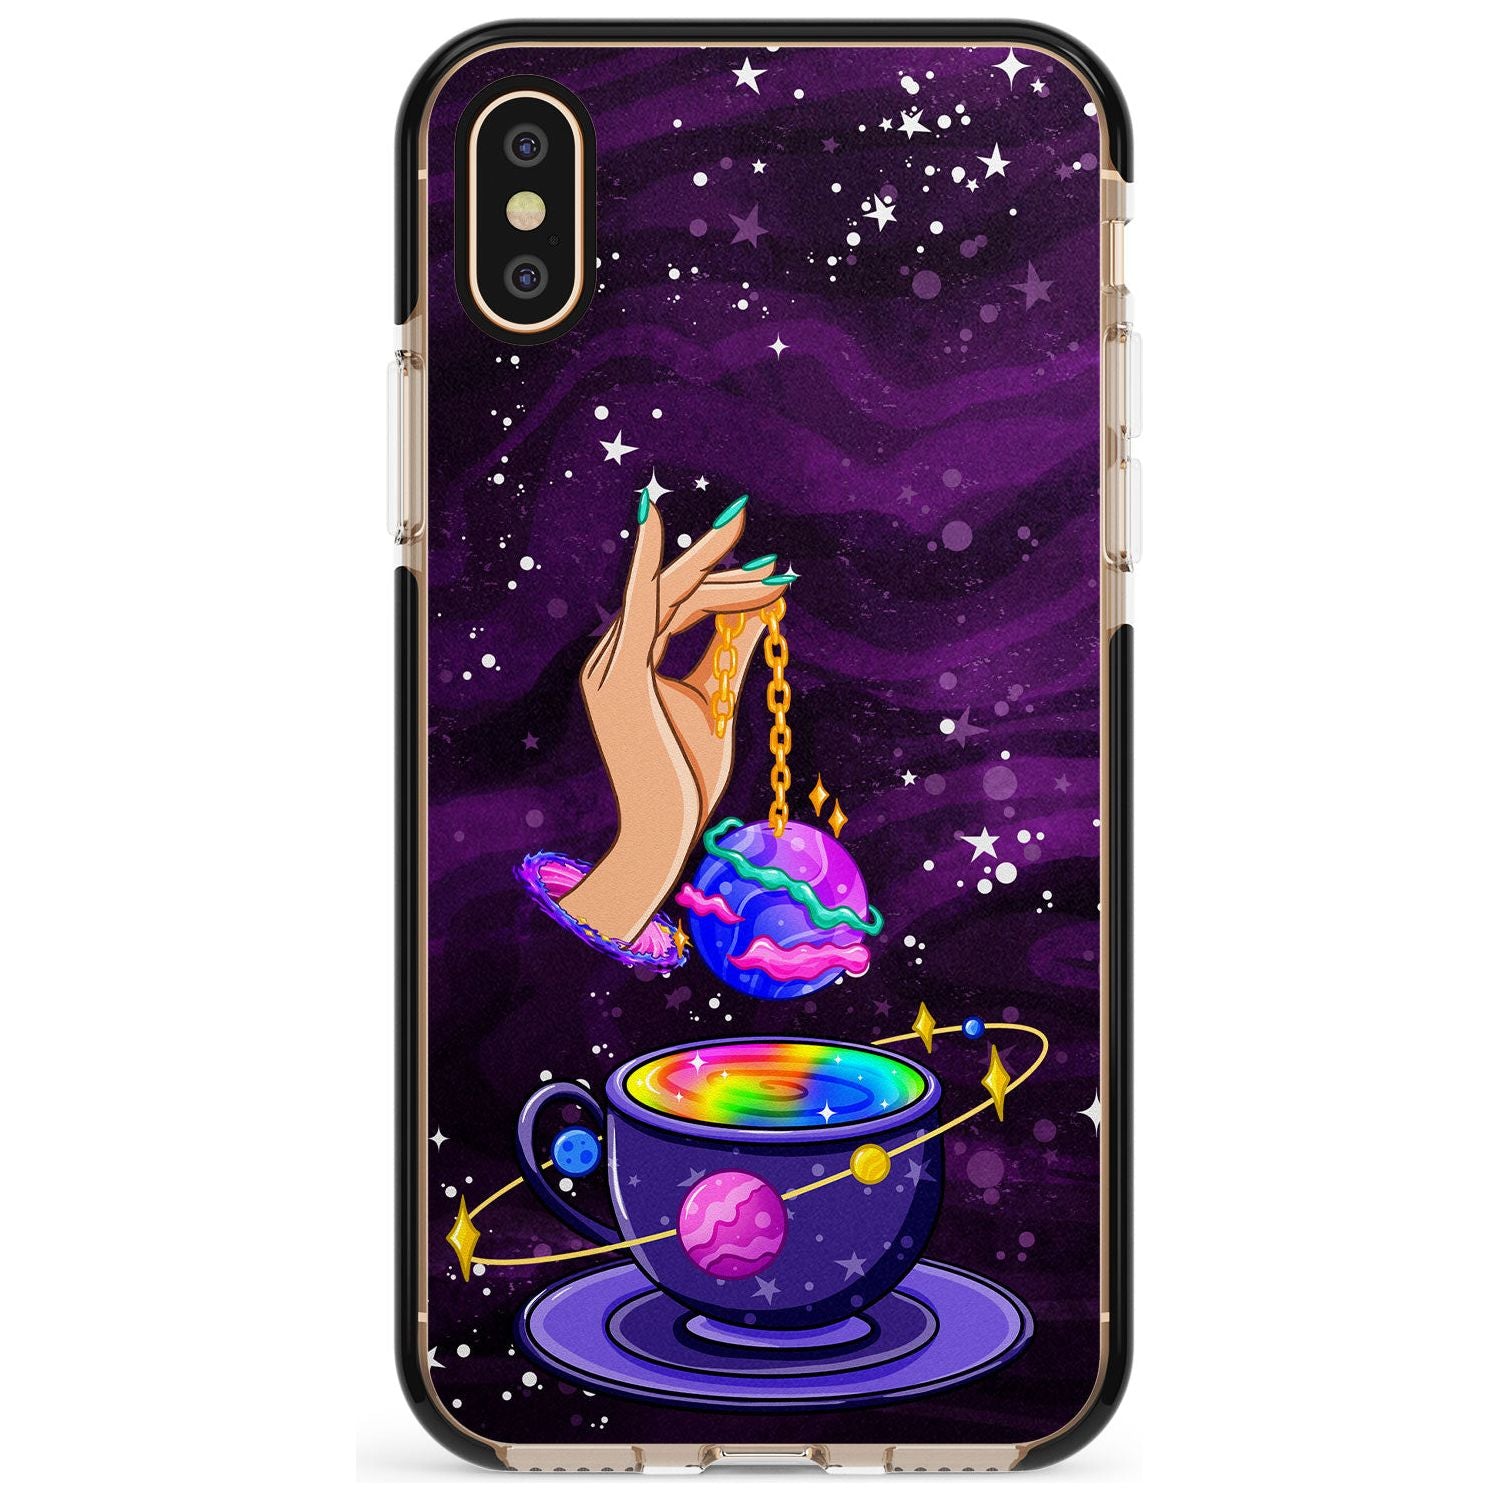 Space Tea Black Impact Phone Case for iPhone X XS Max XR